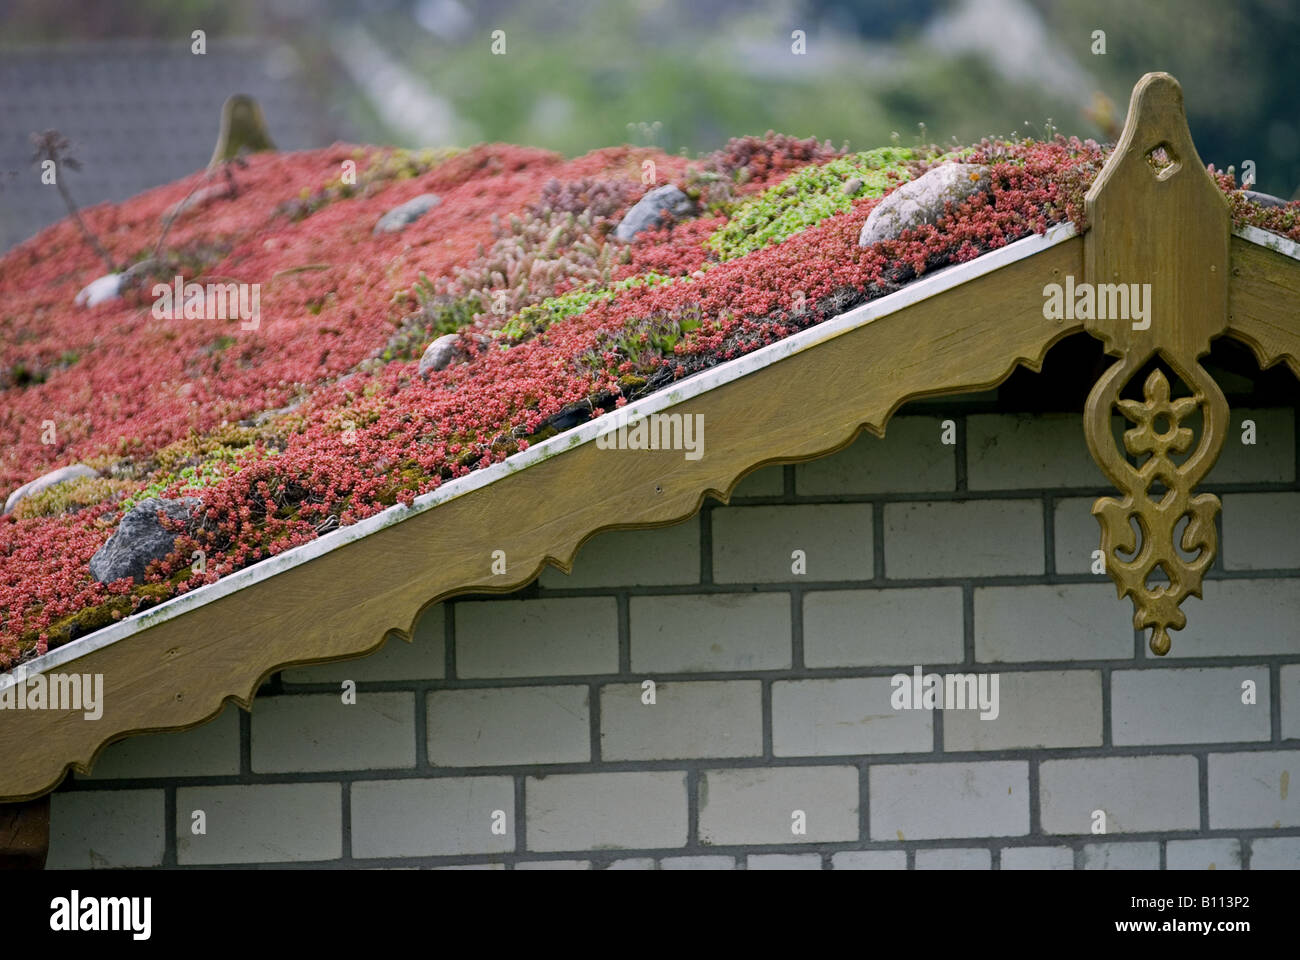 A sedum or 'living roof' on a pitched roof of a public toilet in Leverkusen, North Rhine-Westphalia, Germany. Stock Photo